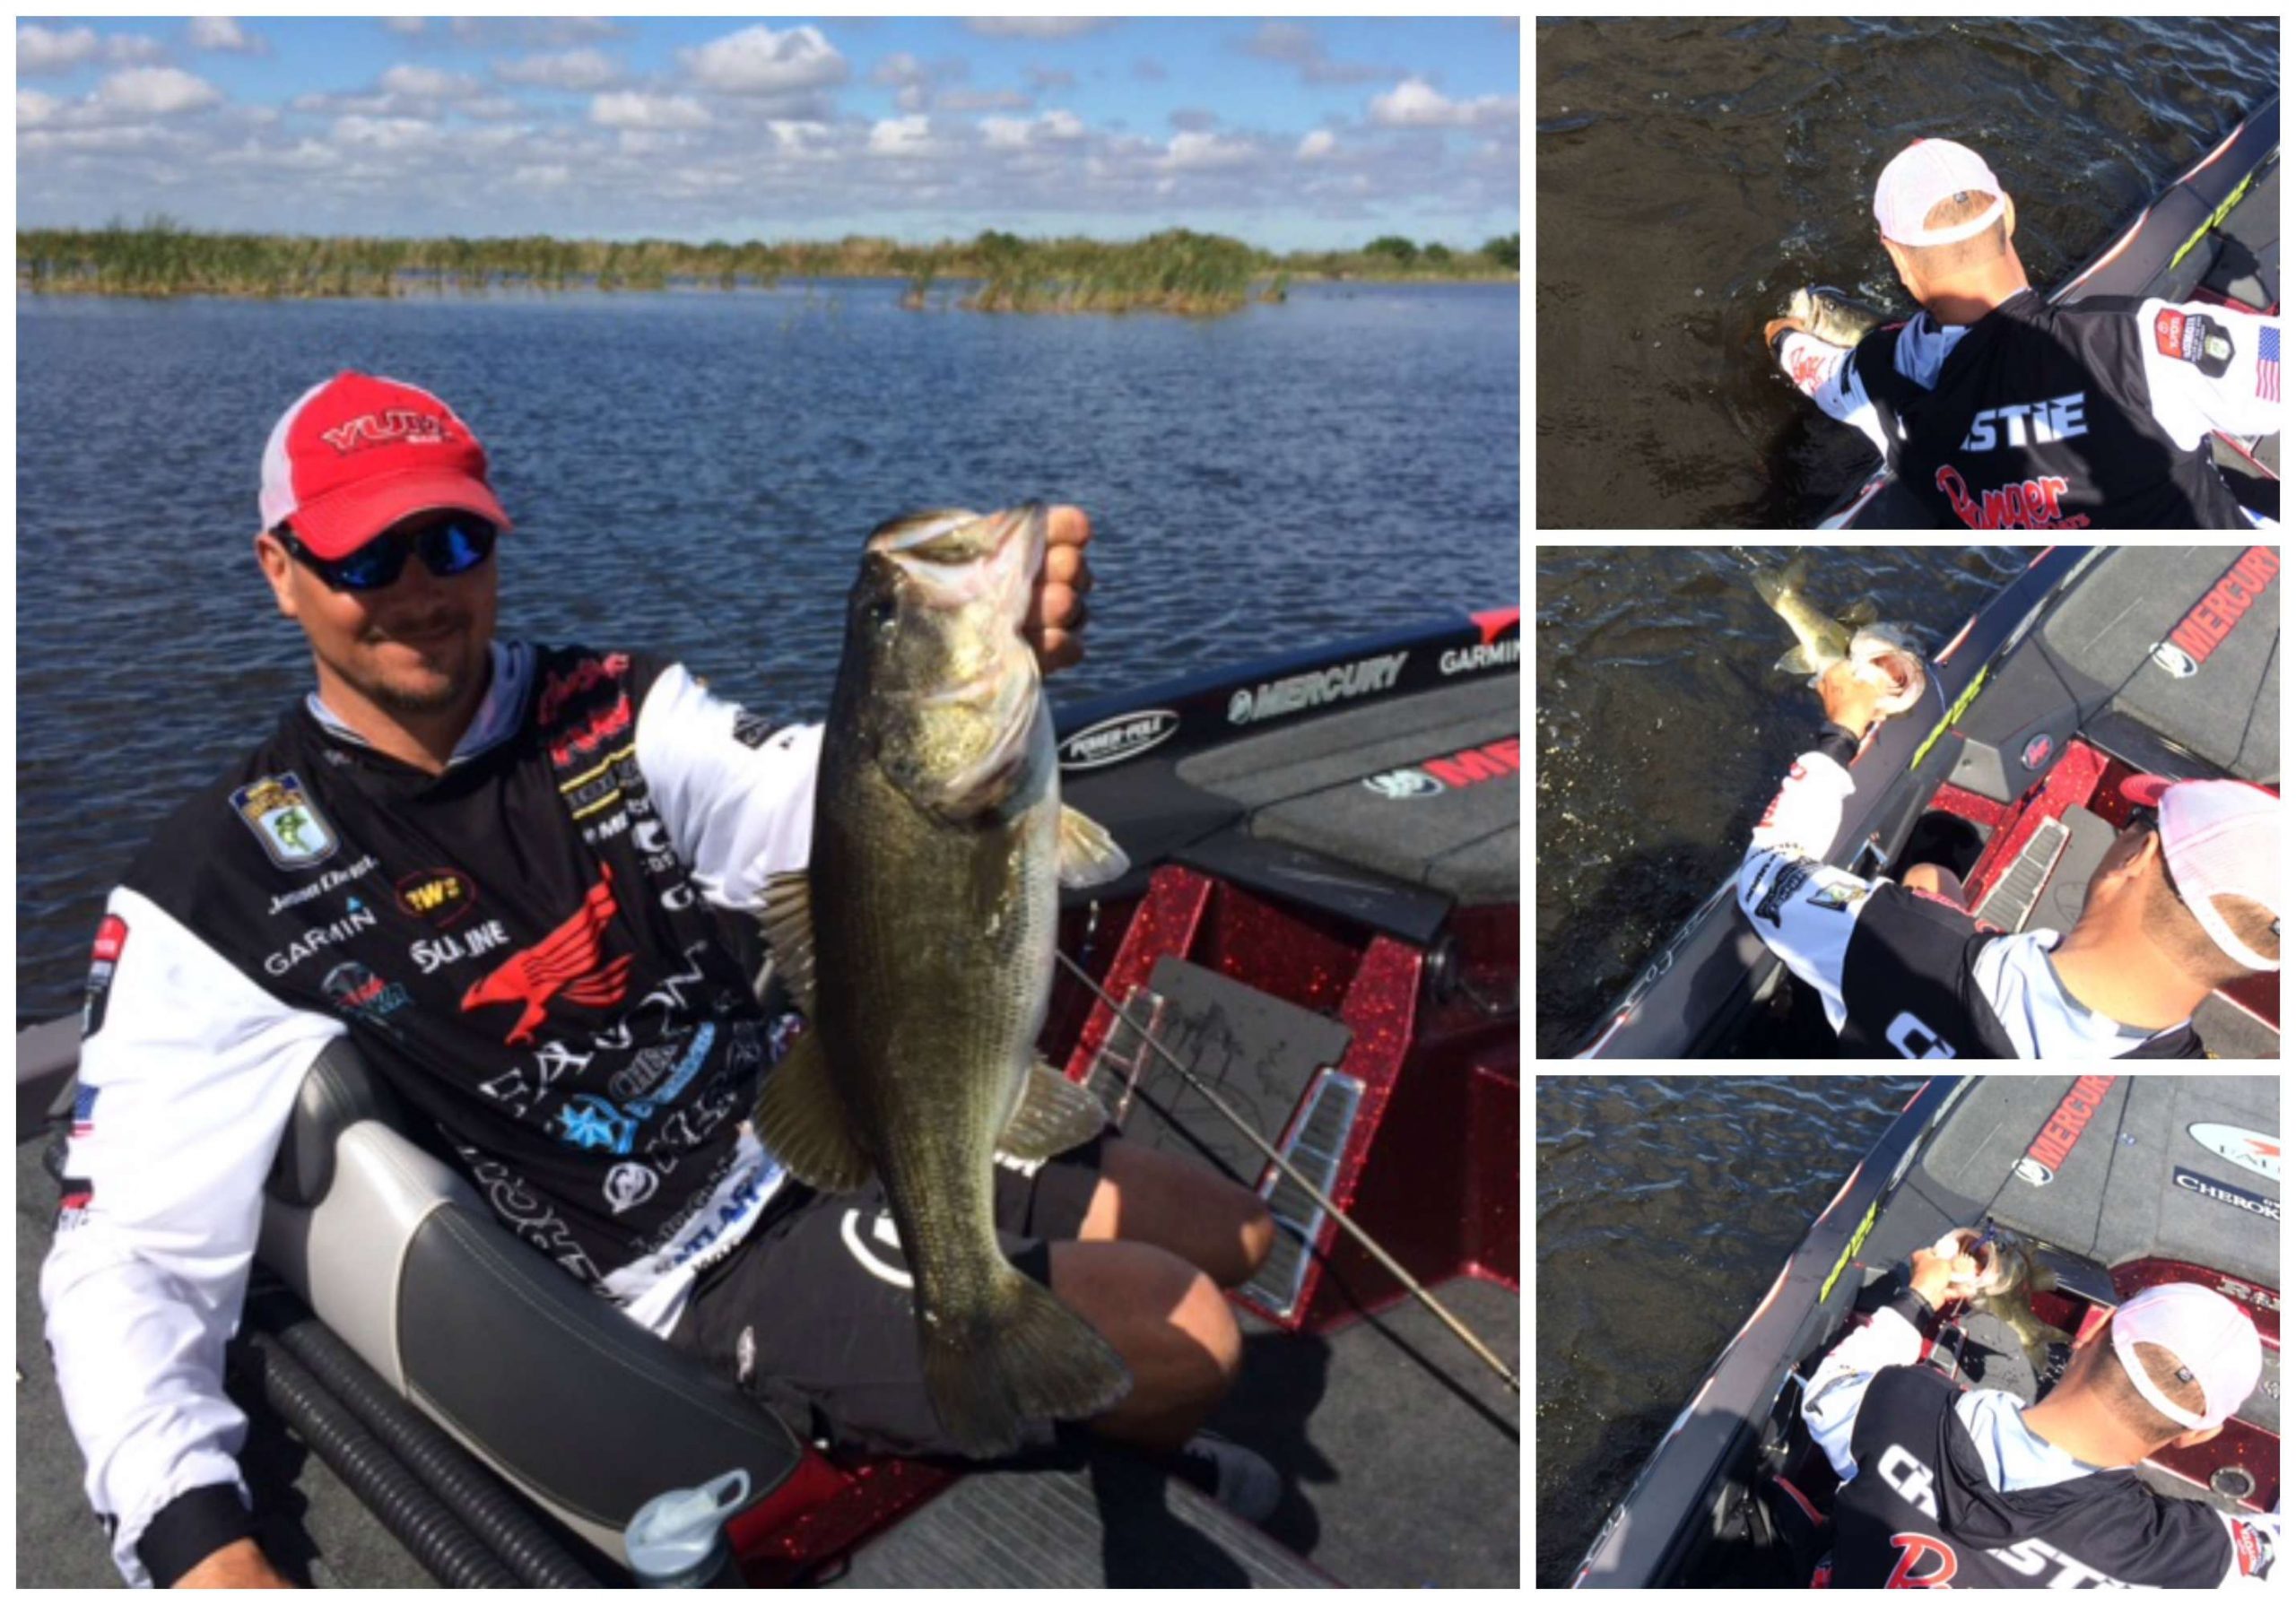 Jason Christie has continued to methodically pick apart his area and has been rewarded for his persistence. This 5-pound fish hit his bait hard. Jason thinks it will continue to improve as the water warms up today.